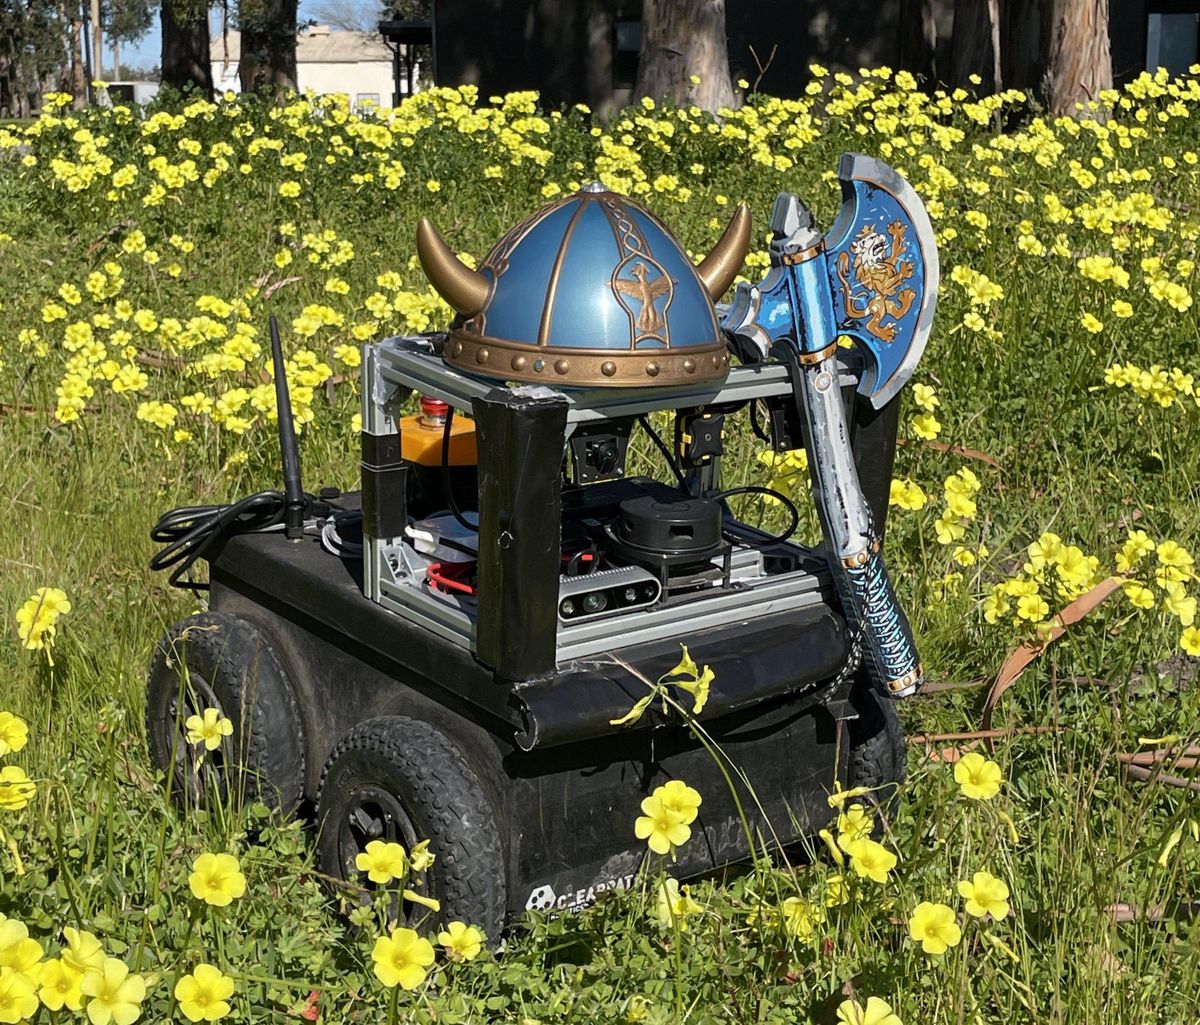 A small wheeled robot in a field of yellow flowers with a toy Viking helmet and axe placed on it